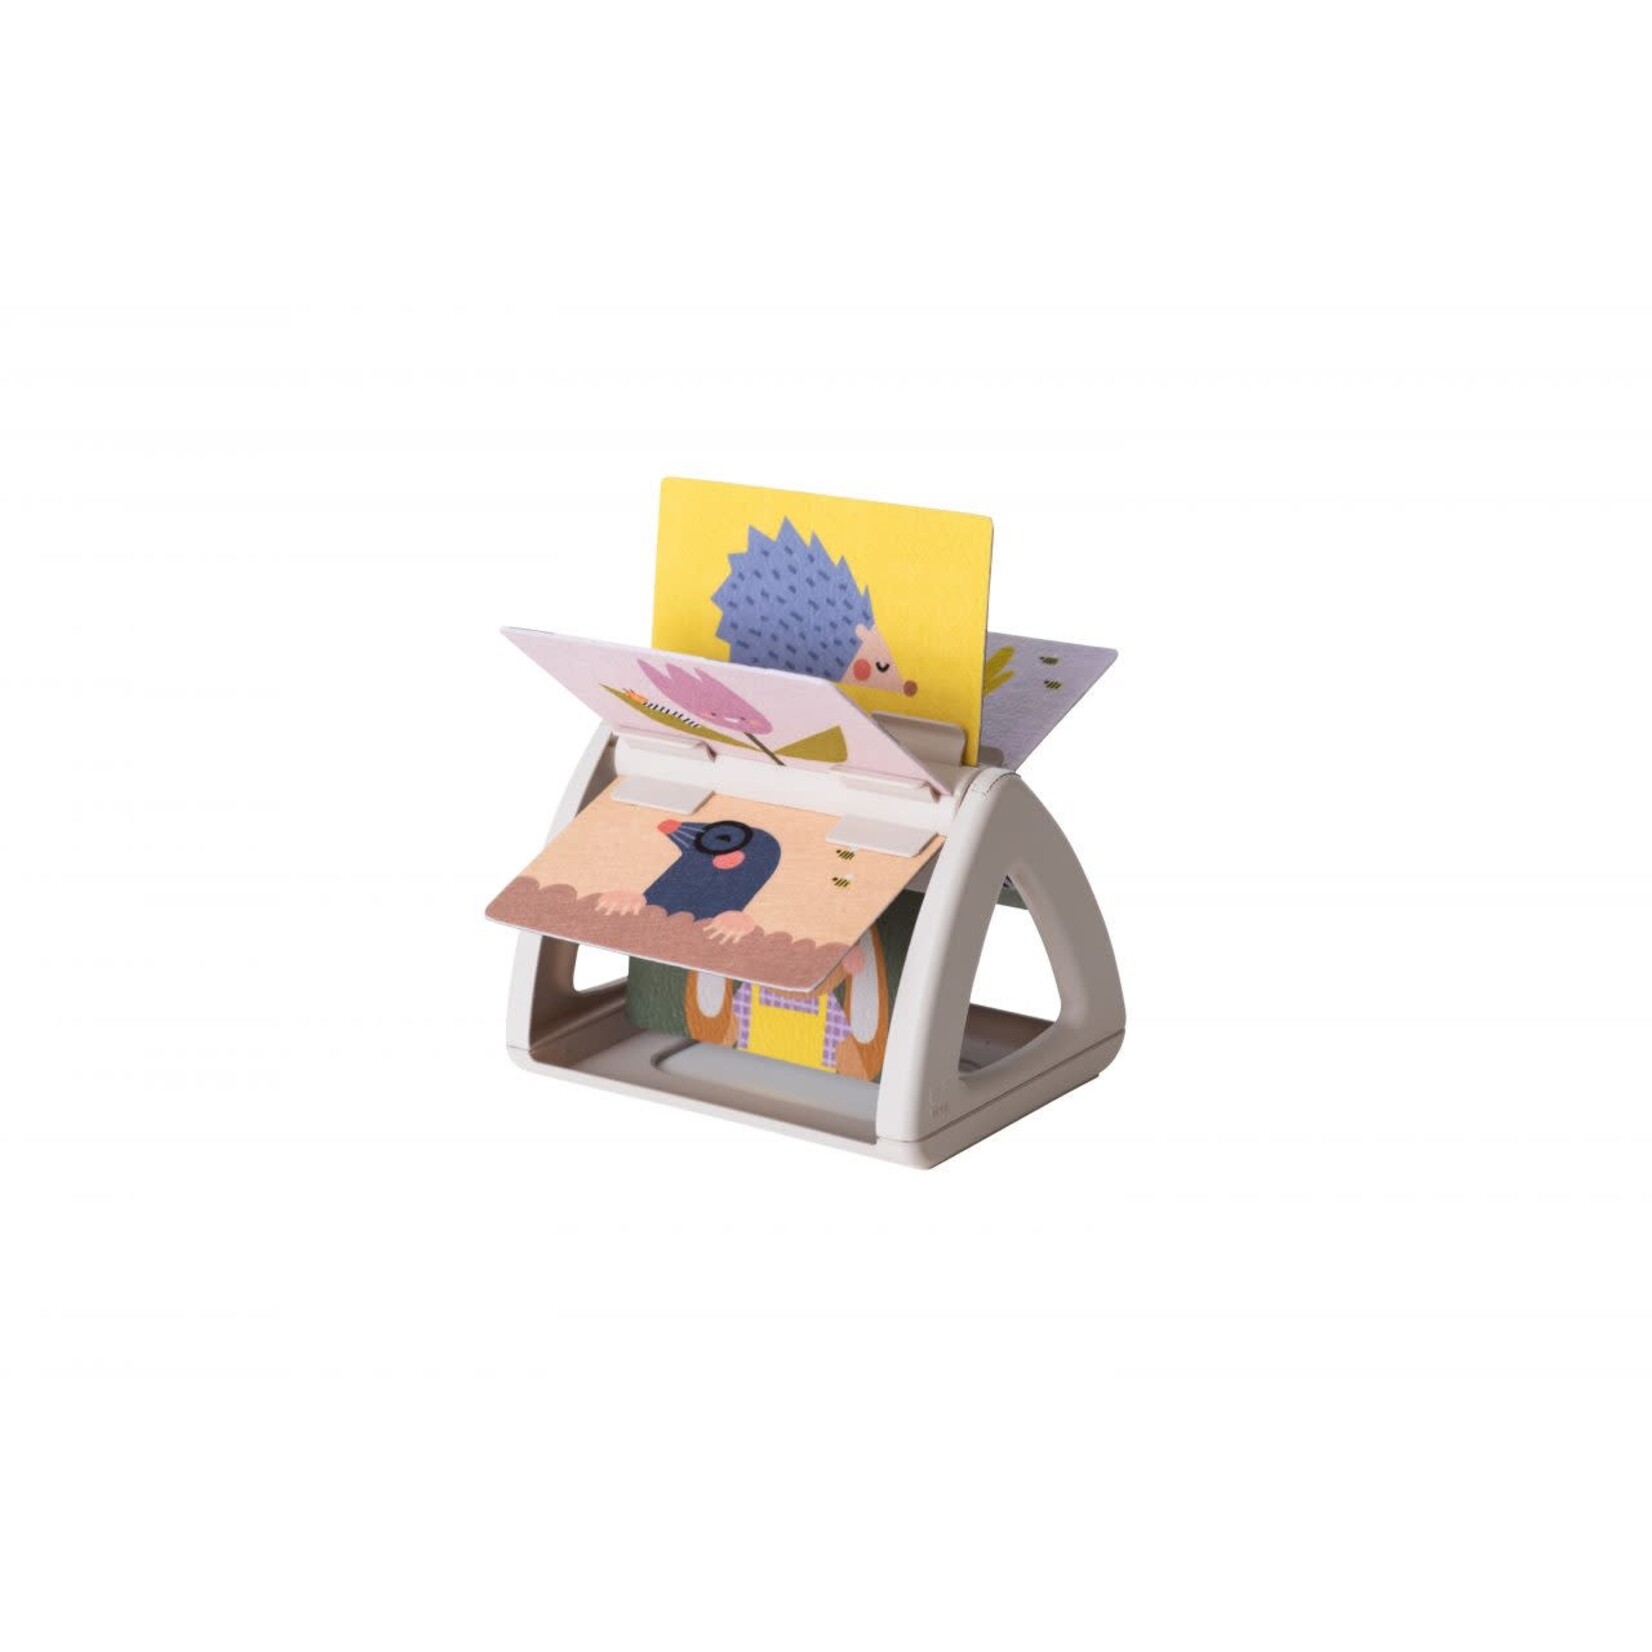 Taf toys Tummy Time Spinning Book